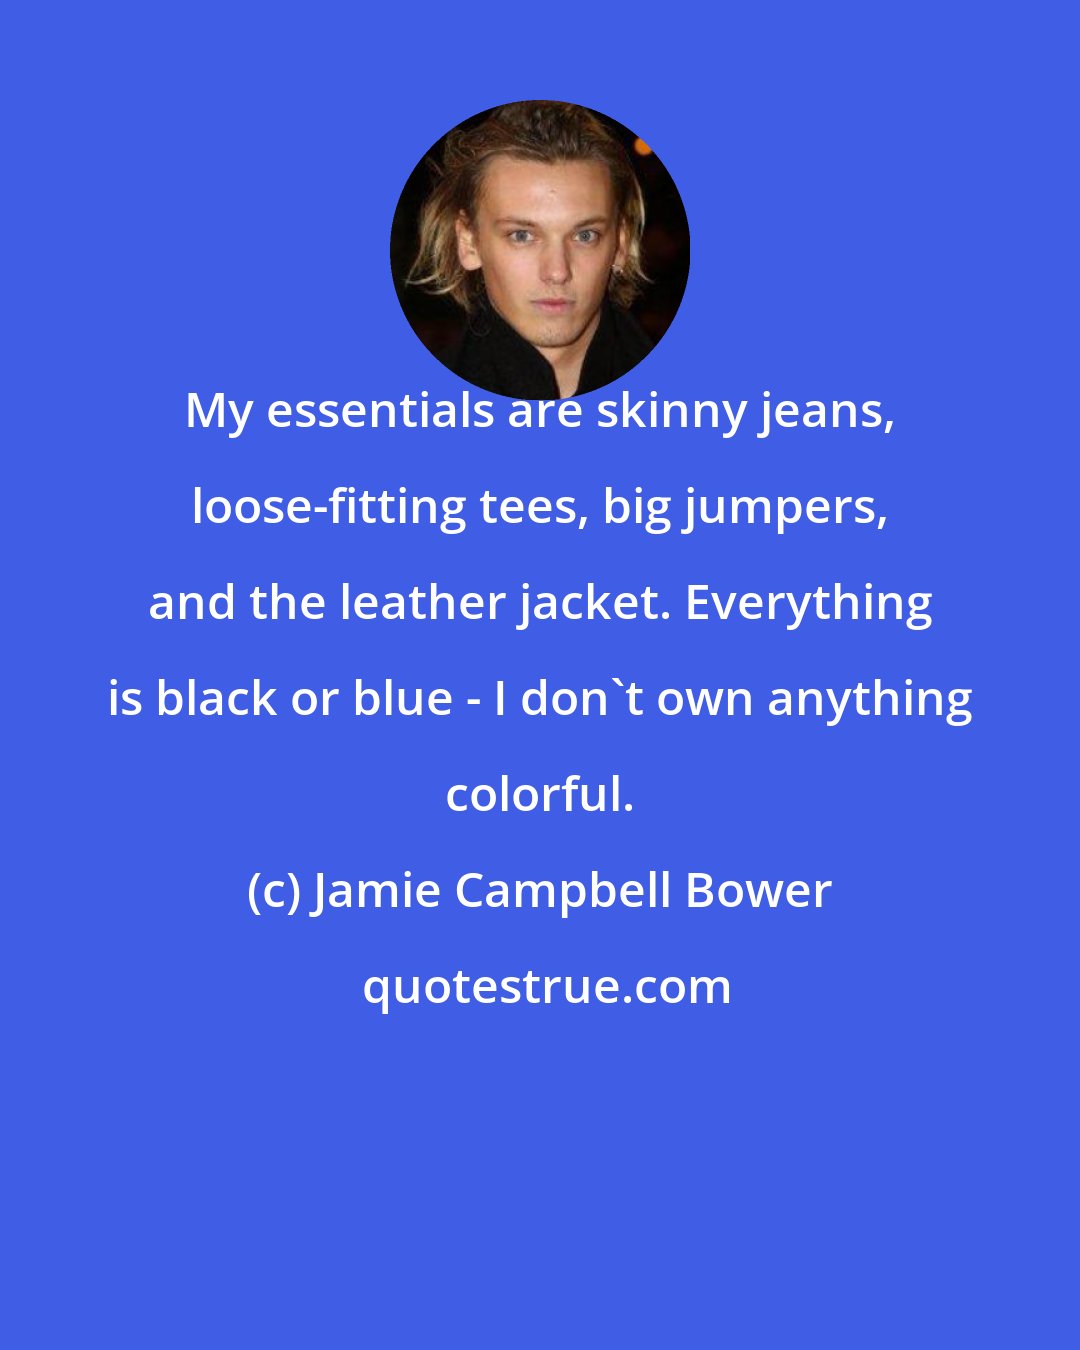 Jamie Campbell Bower: My essentials are skinny jeans, loose-fitting tees, big jumpers, and the leather jacket. Everything is black or blue - I don't own anything colorful.